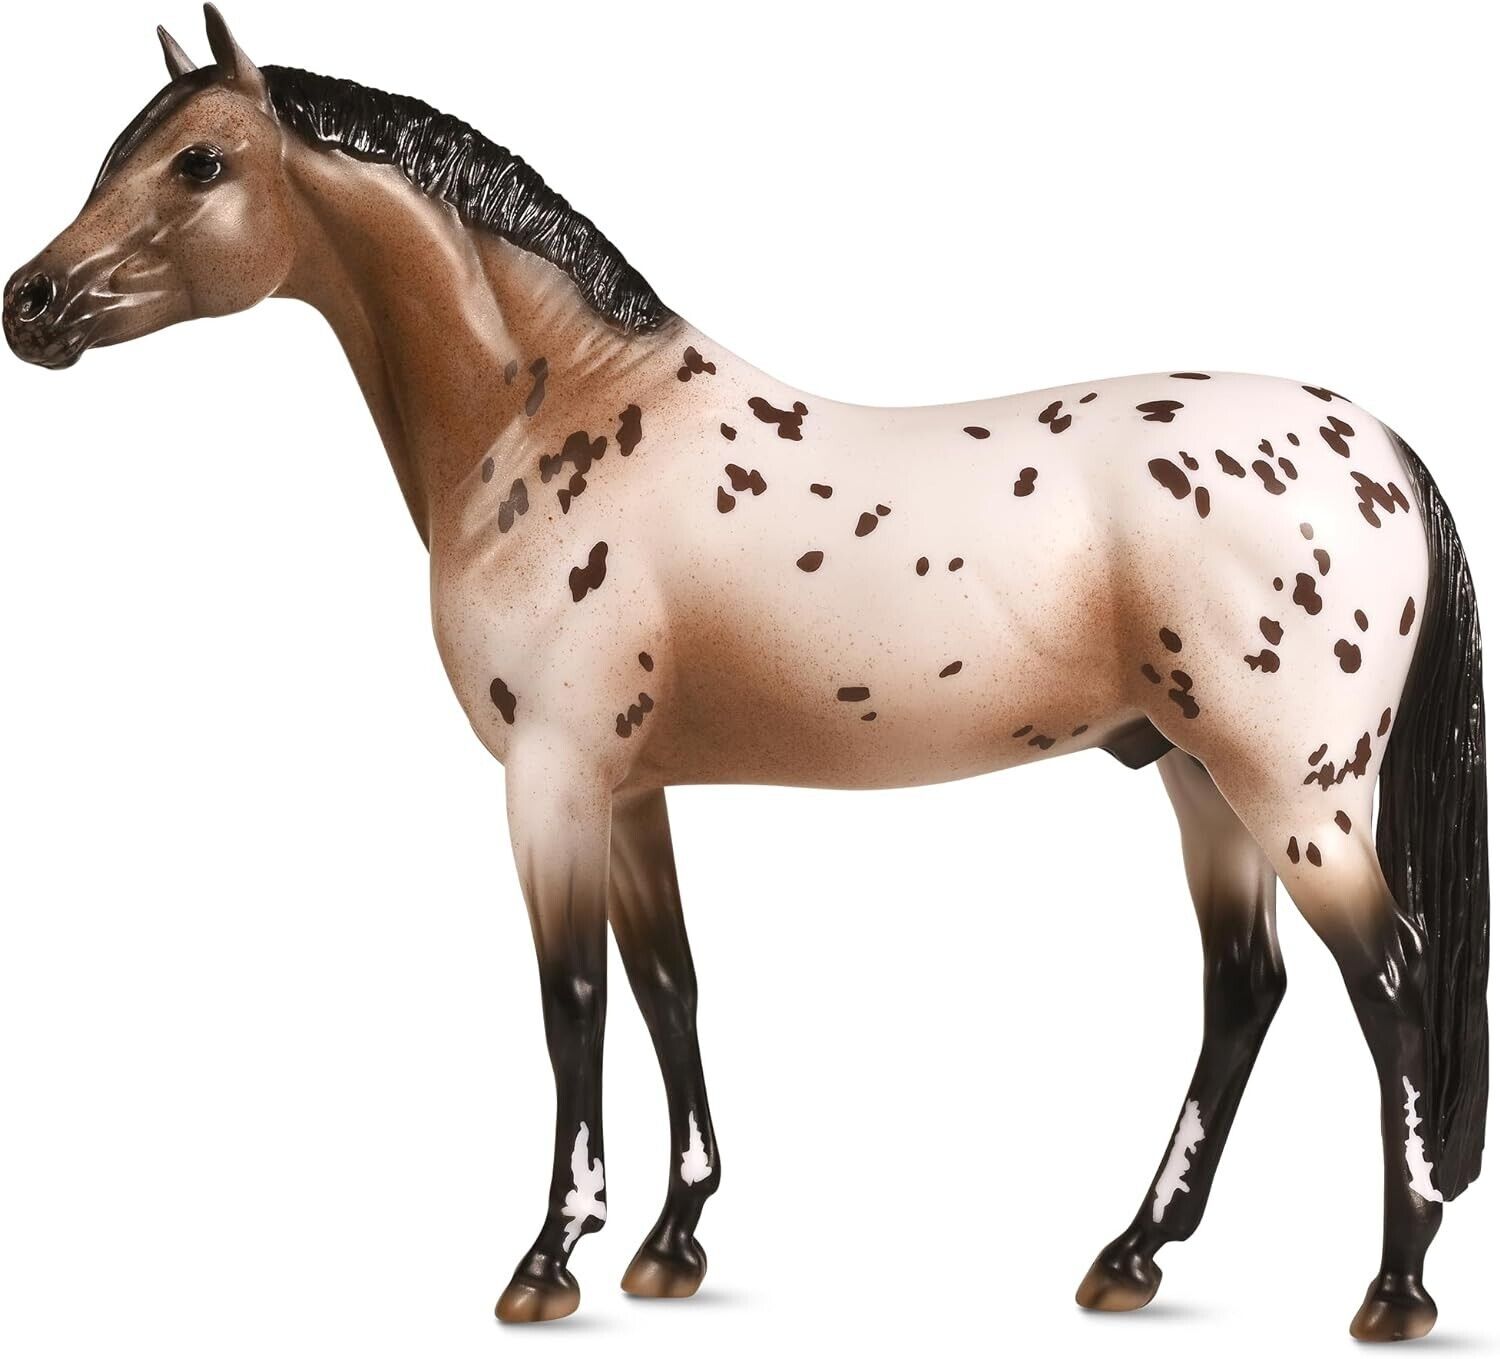 Breyer Horses Traditional The Ideal Series Pony of the Americas Toy Horse #1883